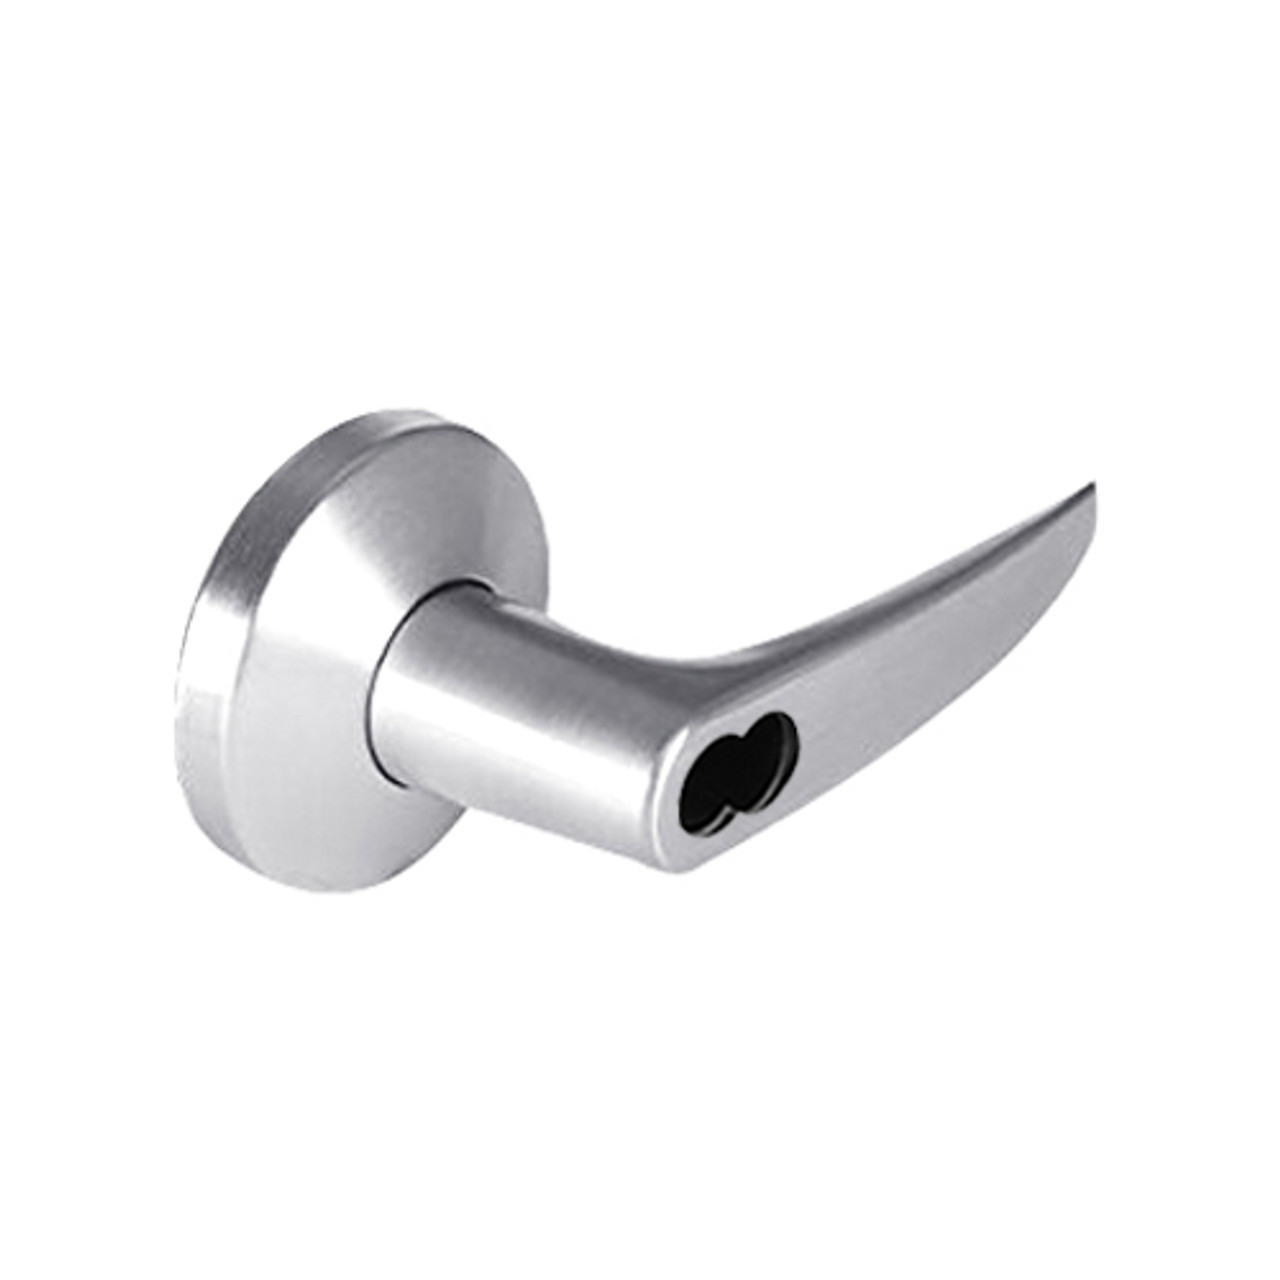 9K57T16KS3625LM Best 9K Series Dormitory Cylindrical Lever Locks with Curved without Return Lever Design Accept 7 Pin Best Core in Bright Chrome